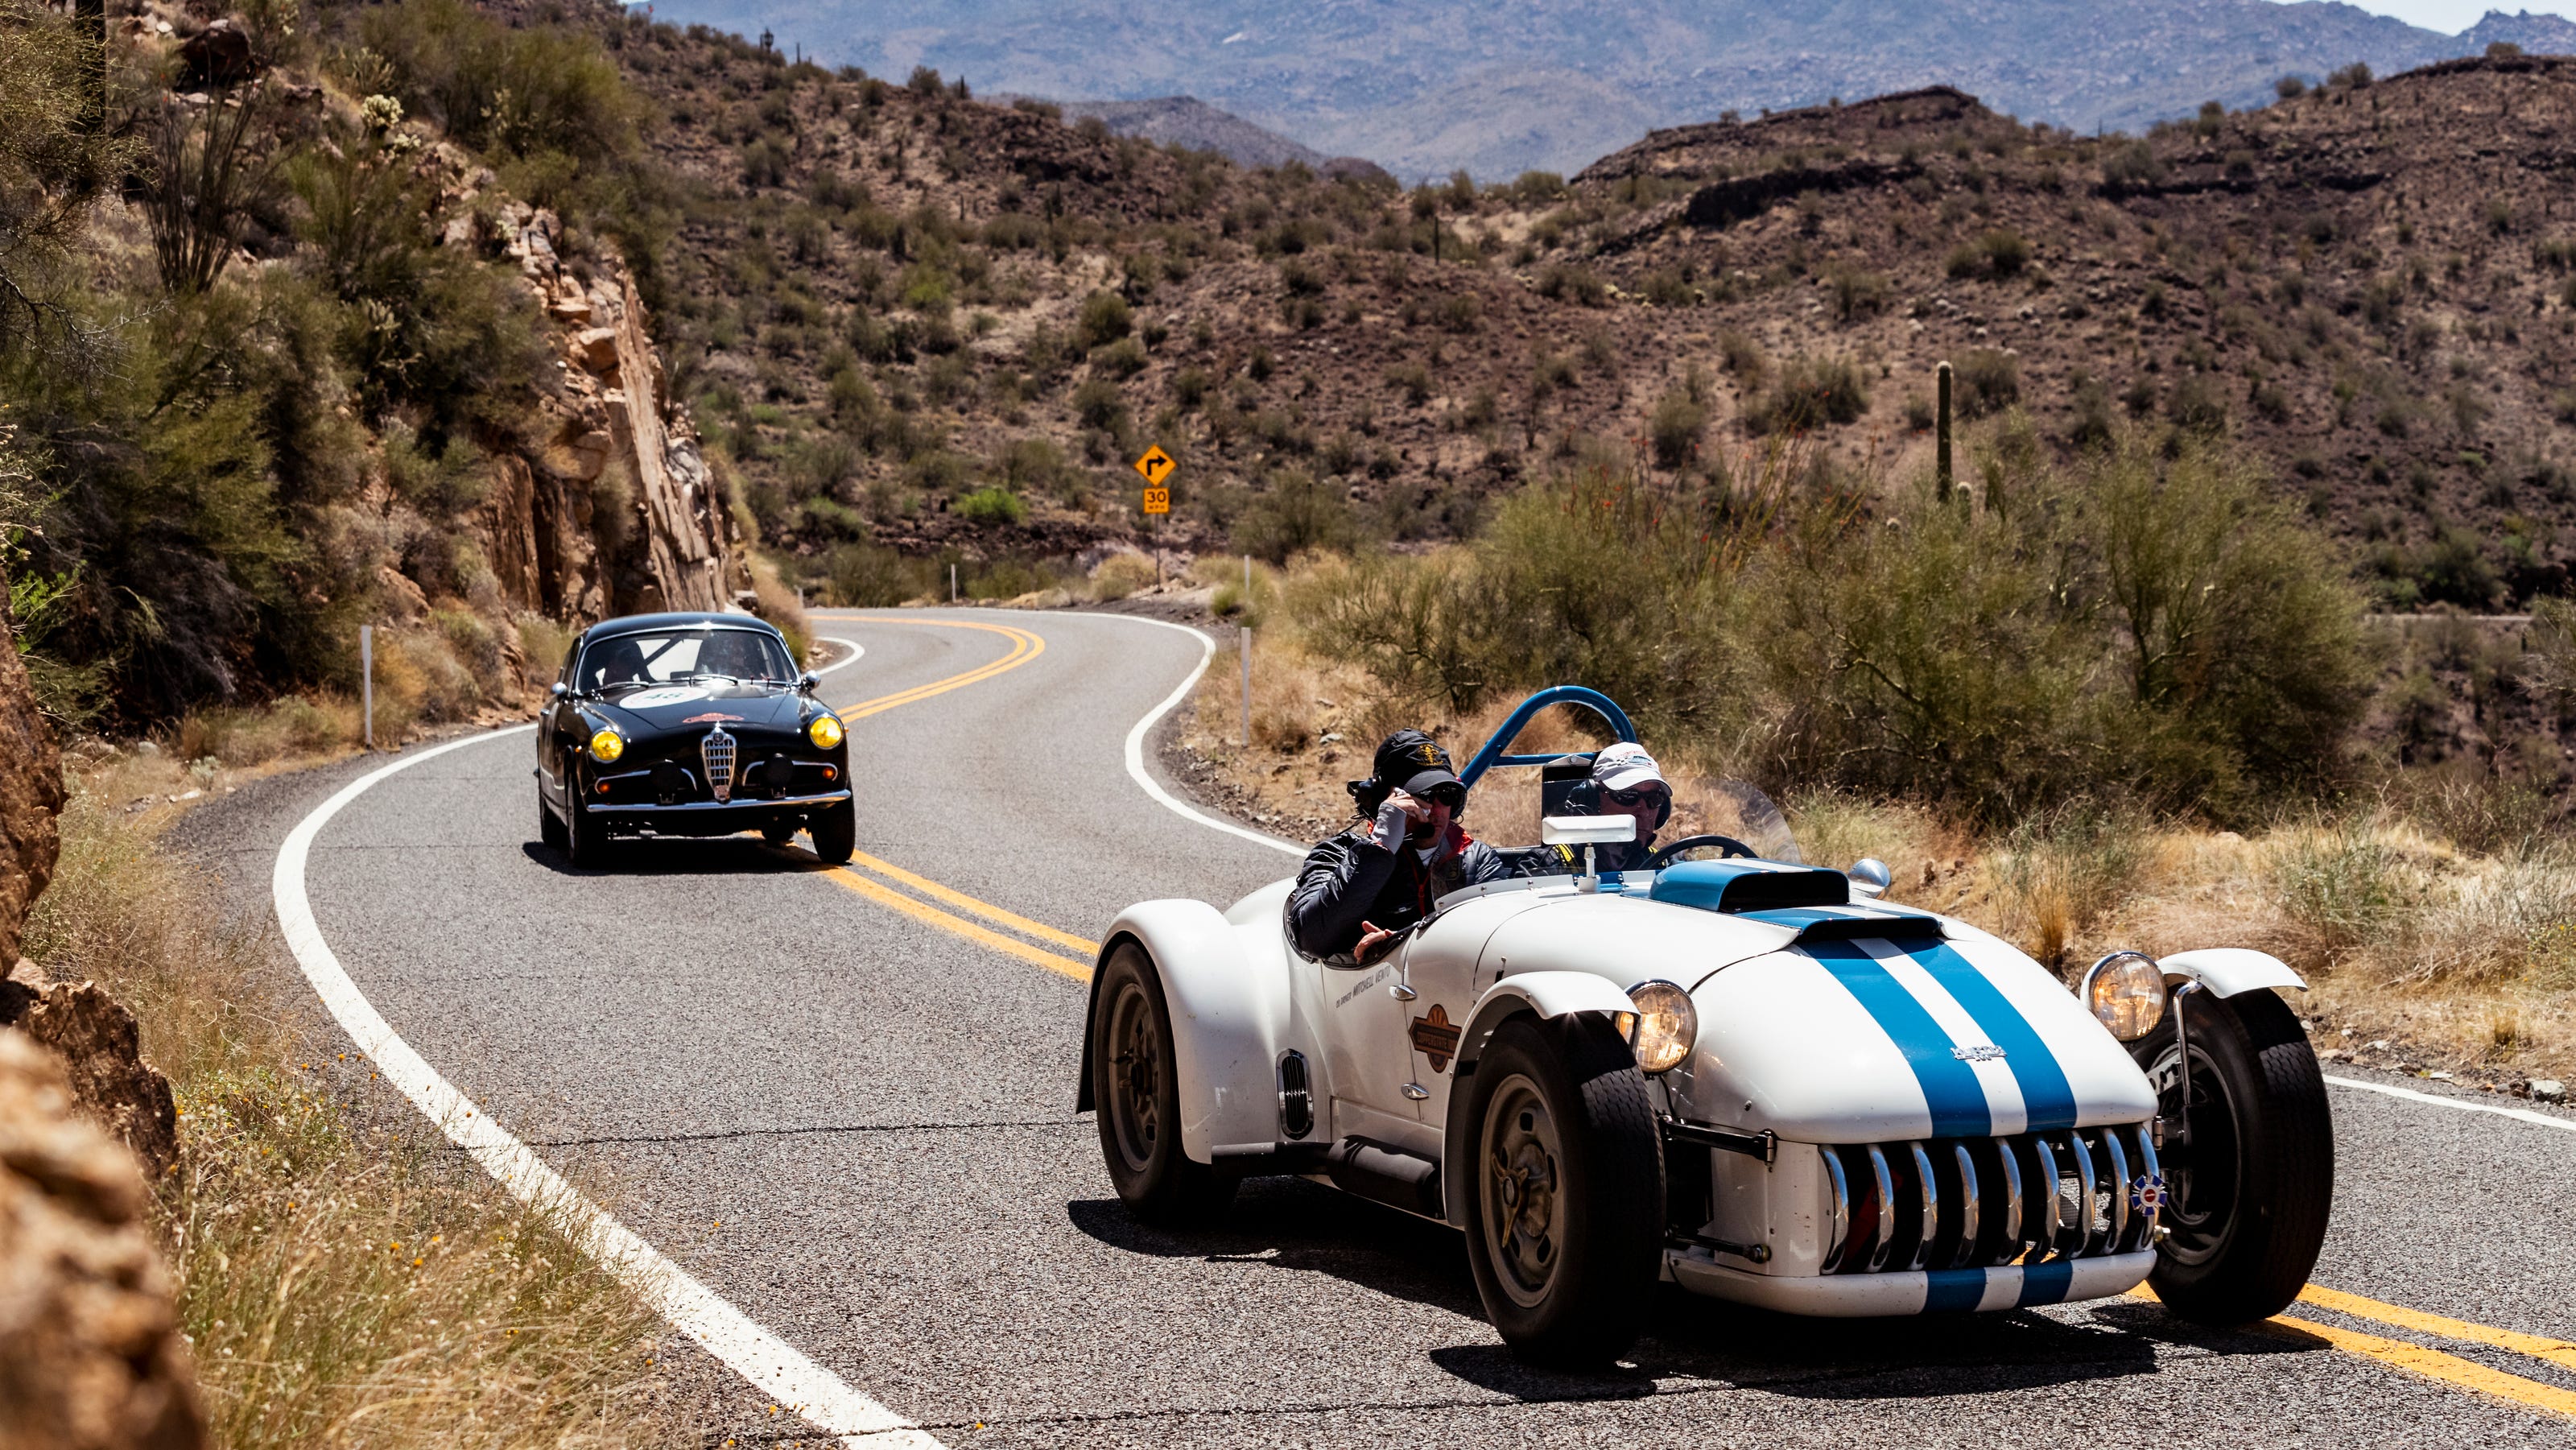 See 90 classic cars in Copperstate 1000 road rally in Arizona